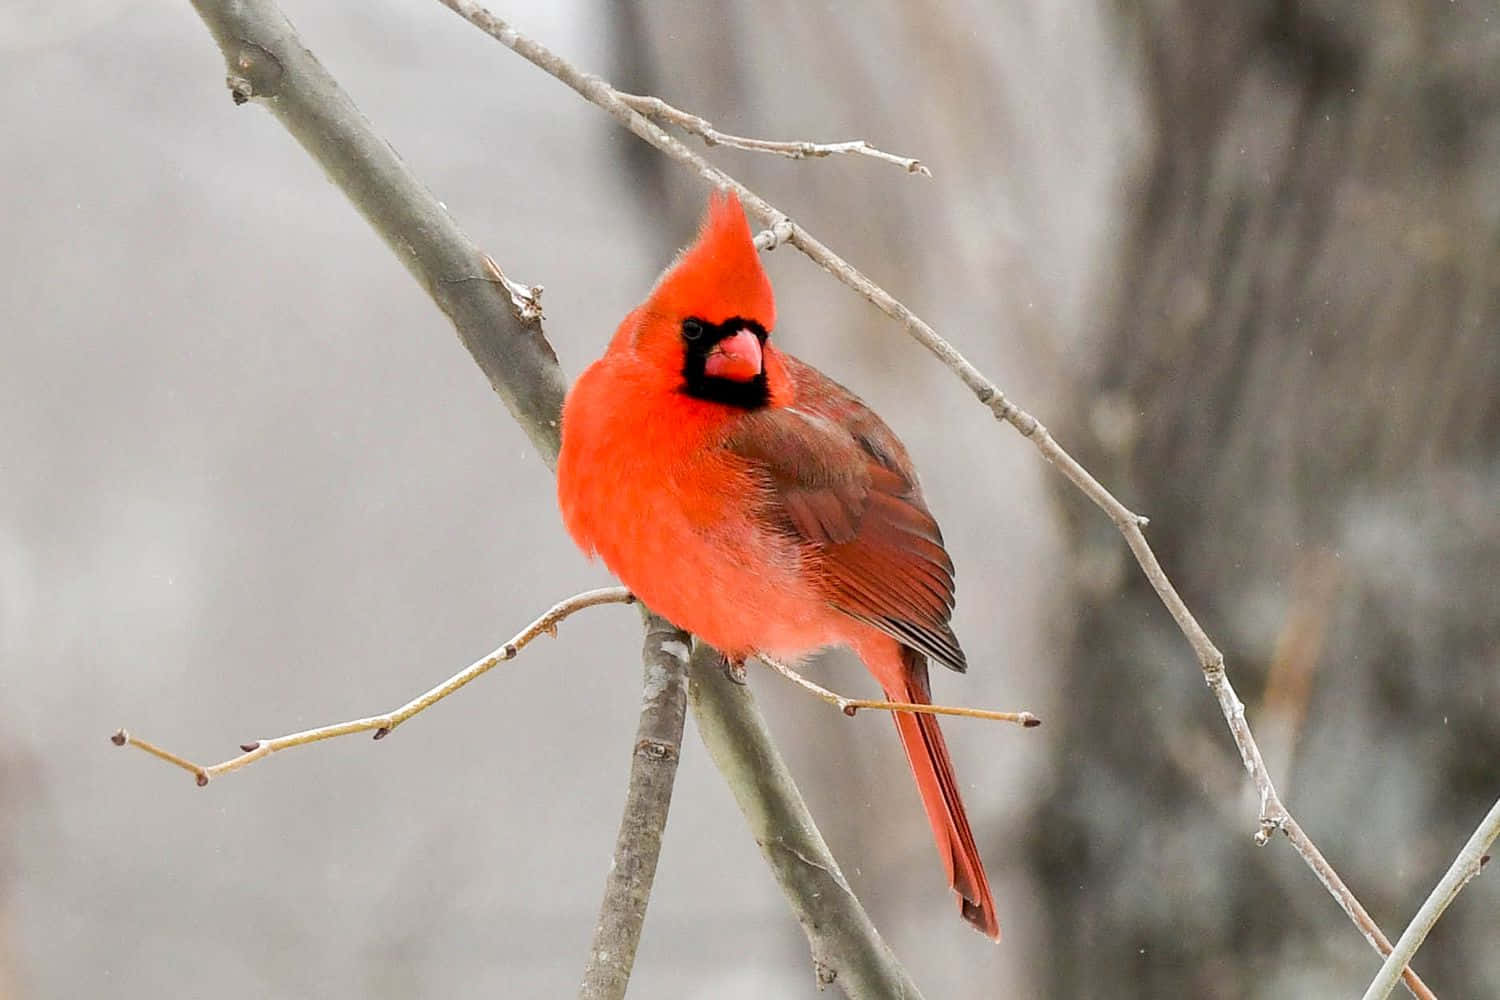 A Flash of Red - A Cardinal Poses in the Breeze